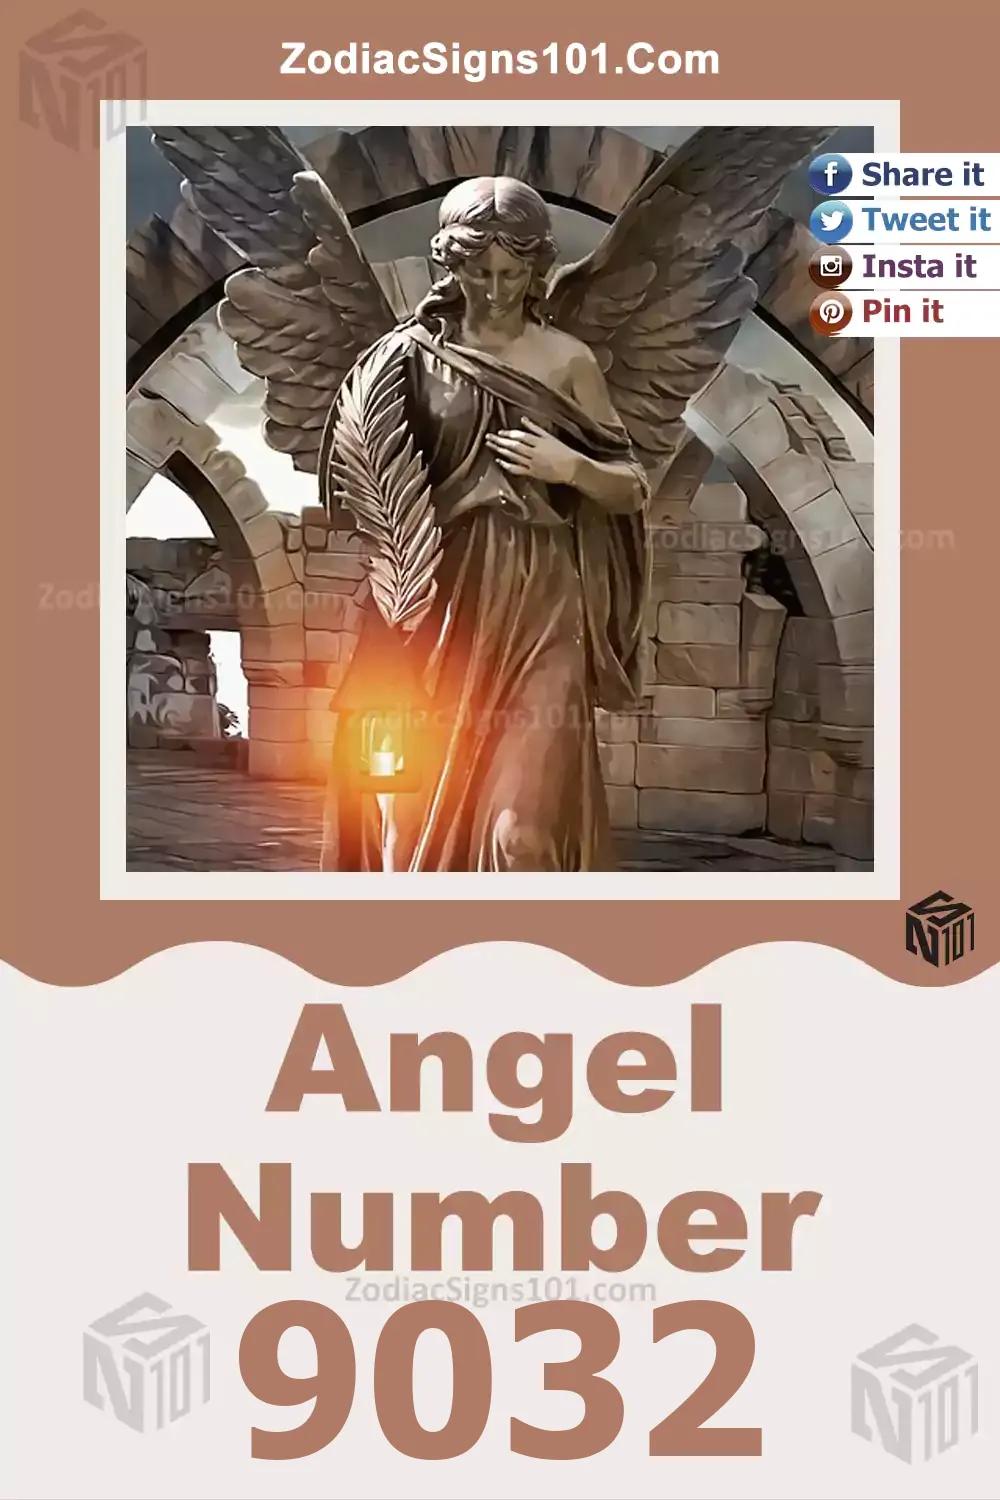 9032 Angel Number Meaning